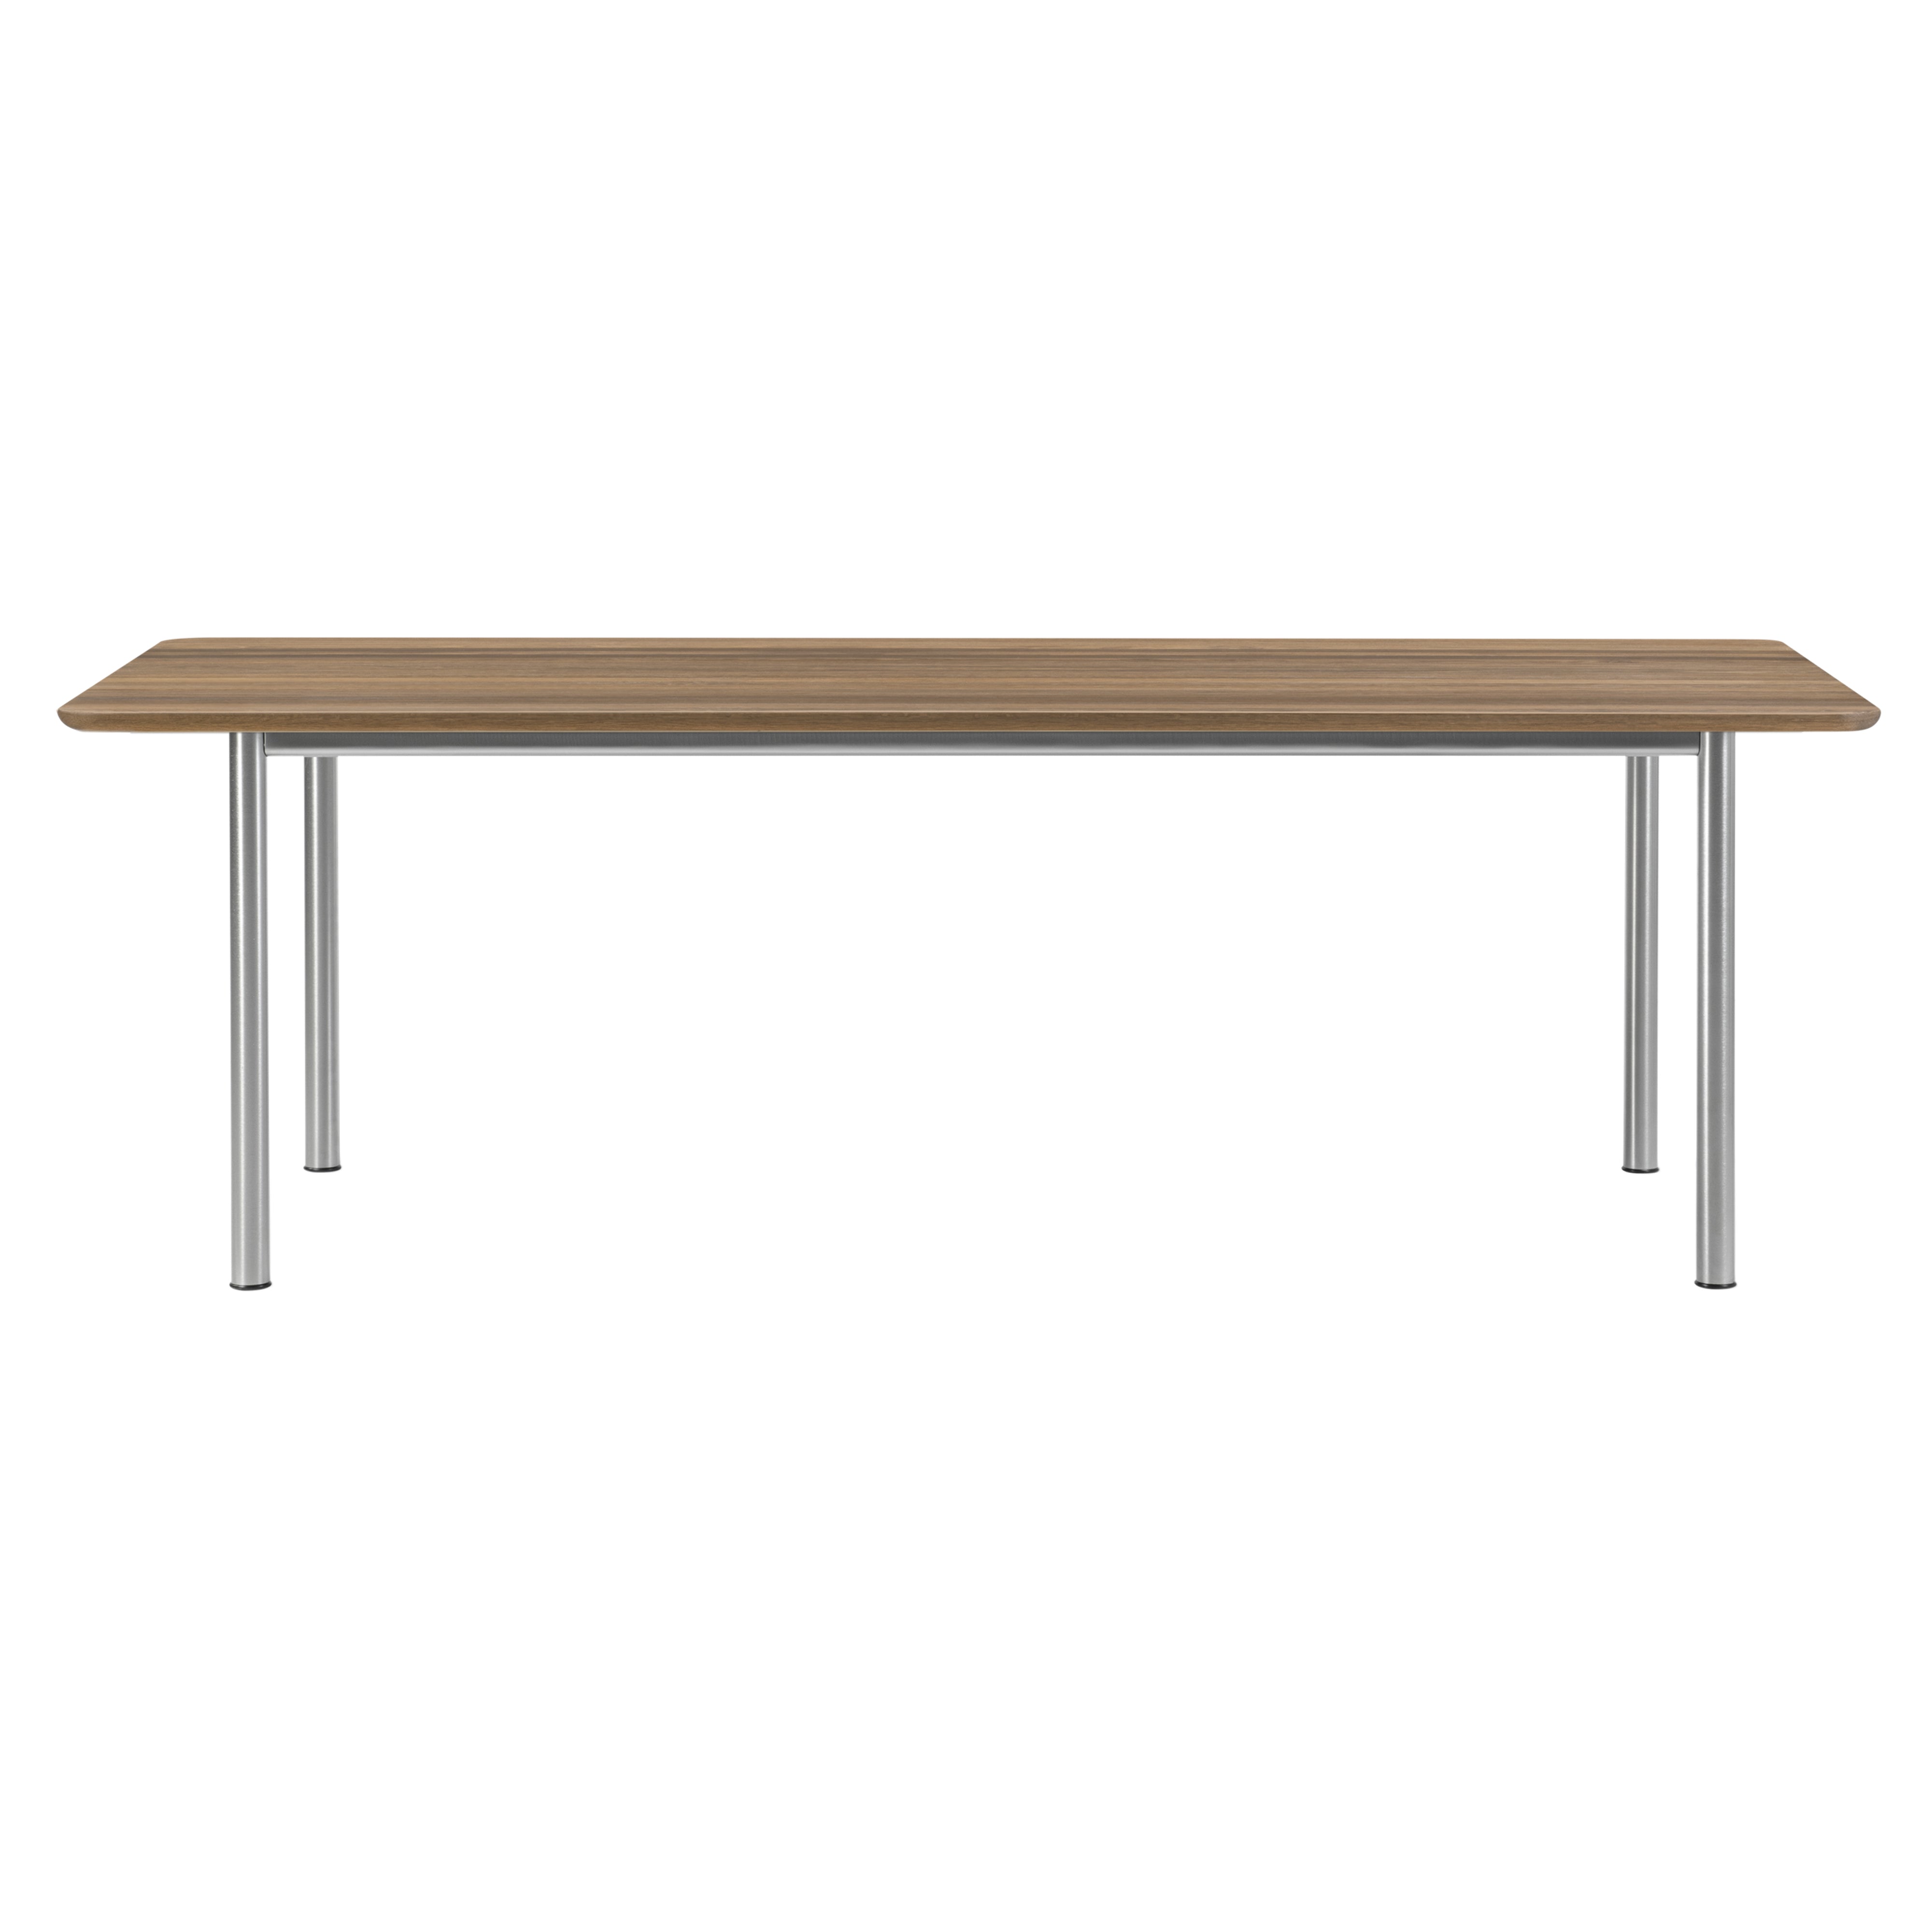 Plan Table: Smoked Oiled Oak + Brushed Steel